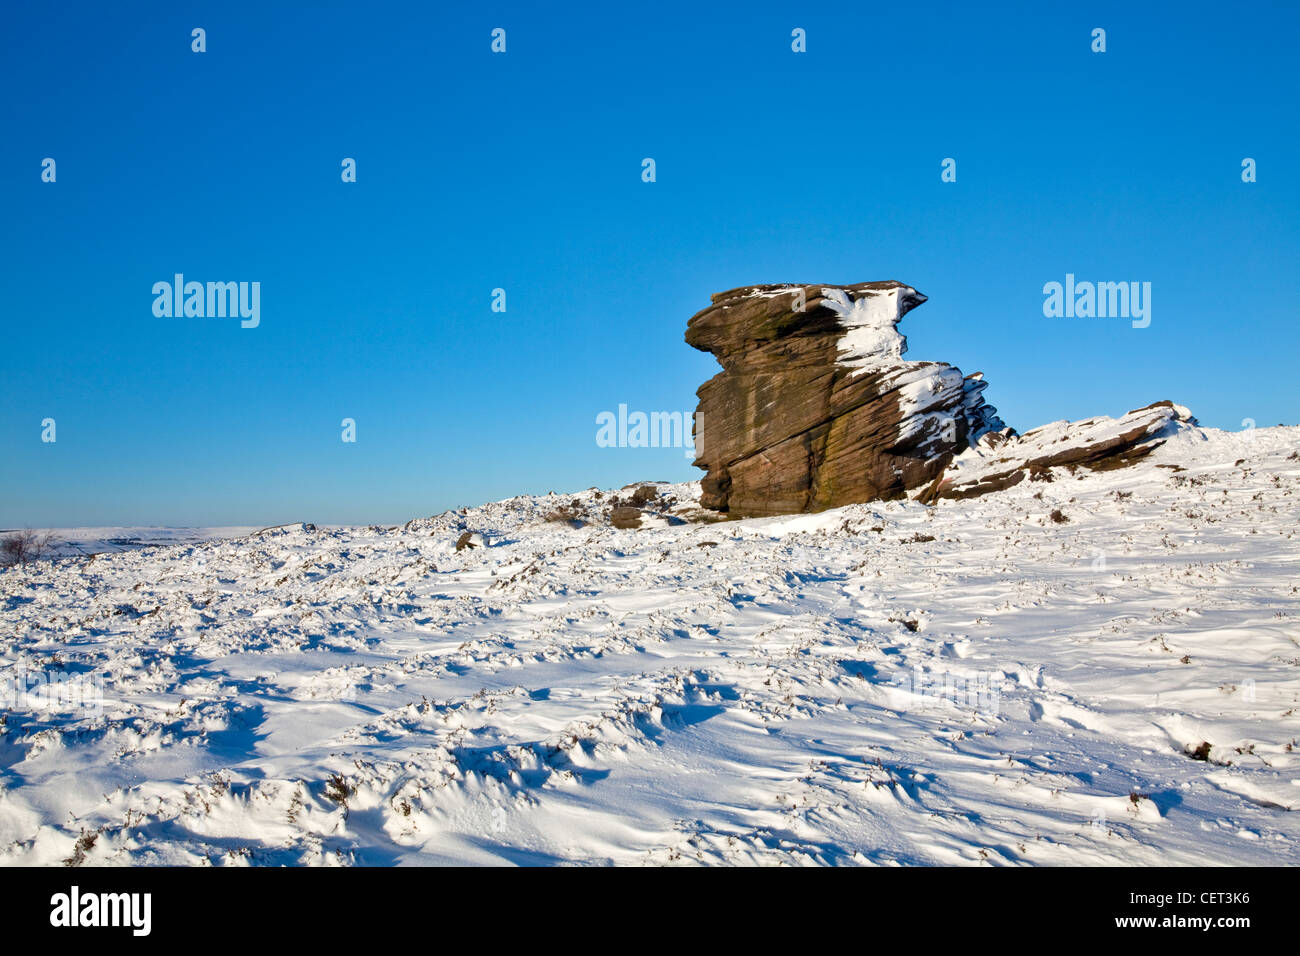 Snow on and surrounding Mother Cap, a large gritstone rock formation in the Peak District National Park. Stock Photo